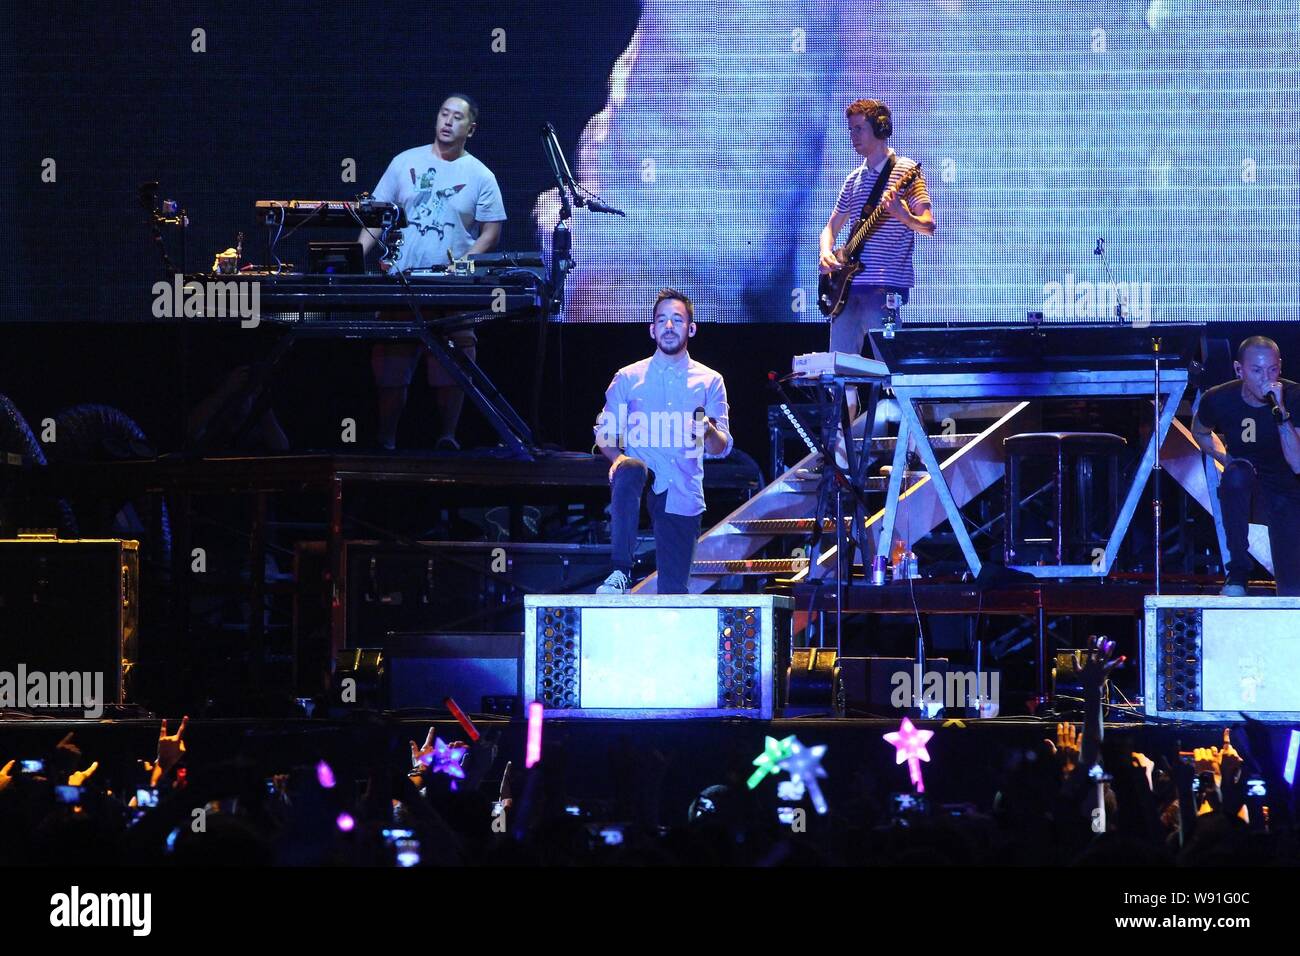 Members of American rock band Linkin Park perform during a concert in Taipei, Taiwan, 17 August 2013. Stock Photo